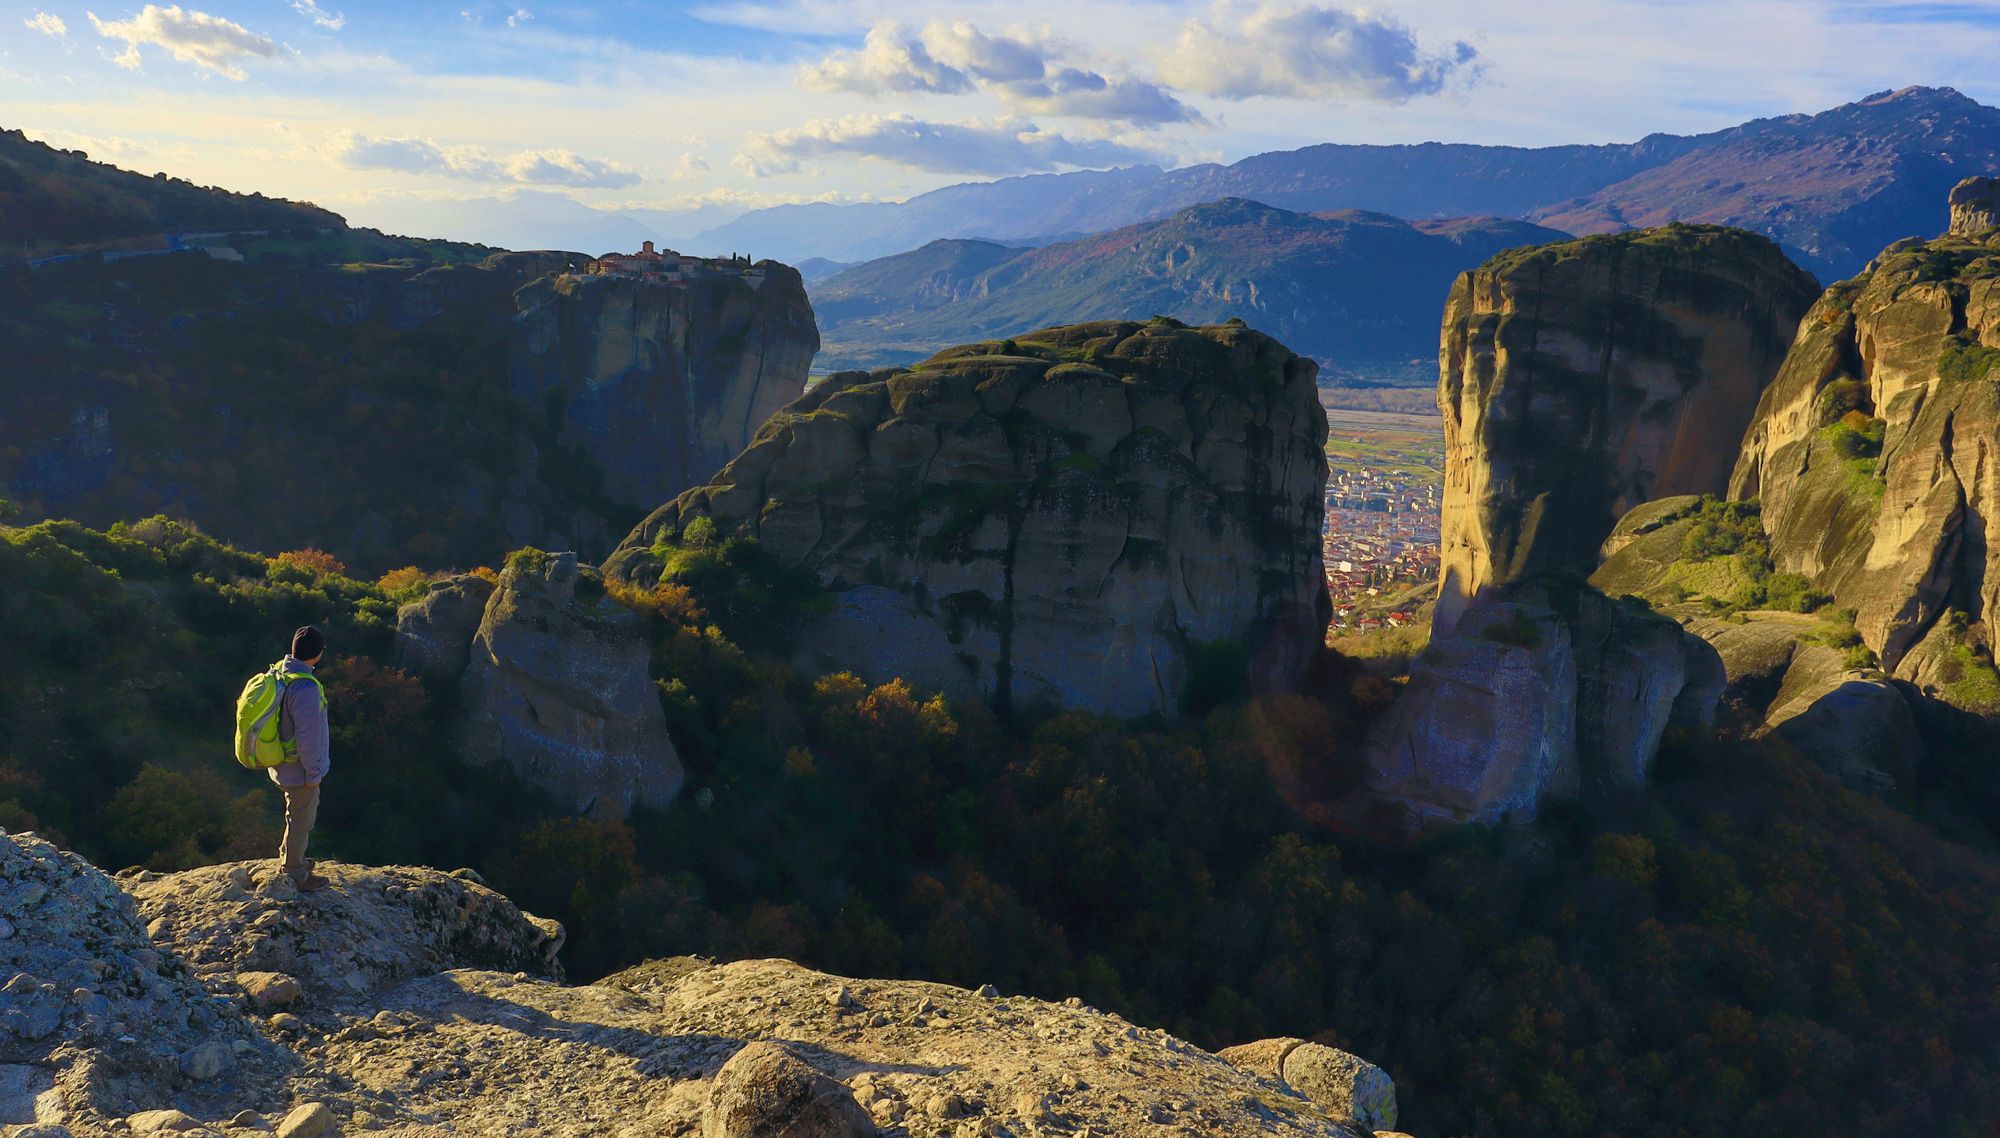 Hiking in Meteora: On way from Agios Stefanos to Agia Triada monasteries